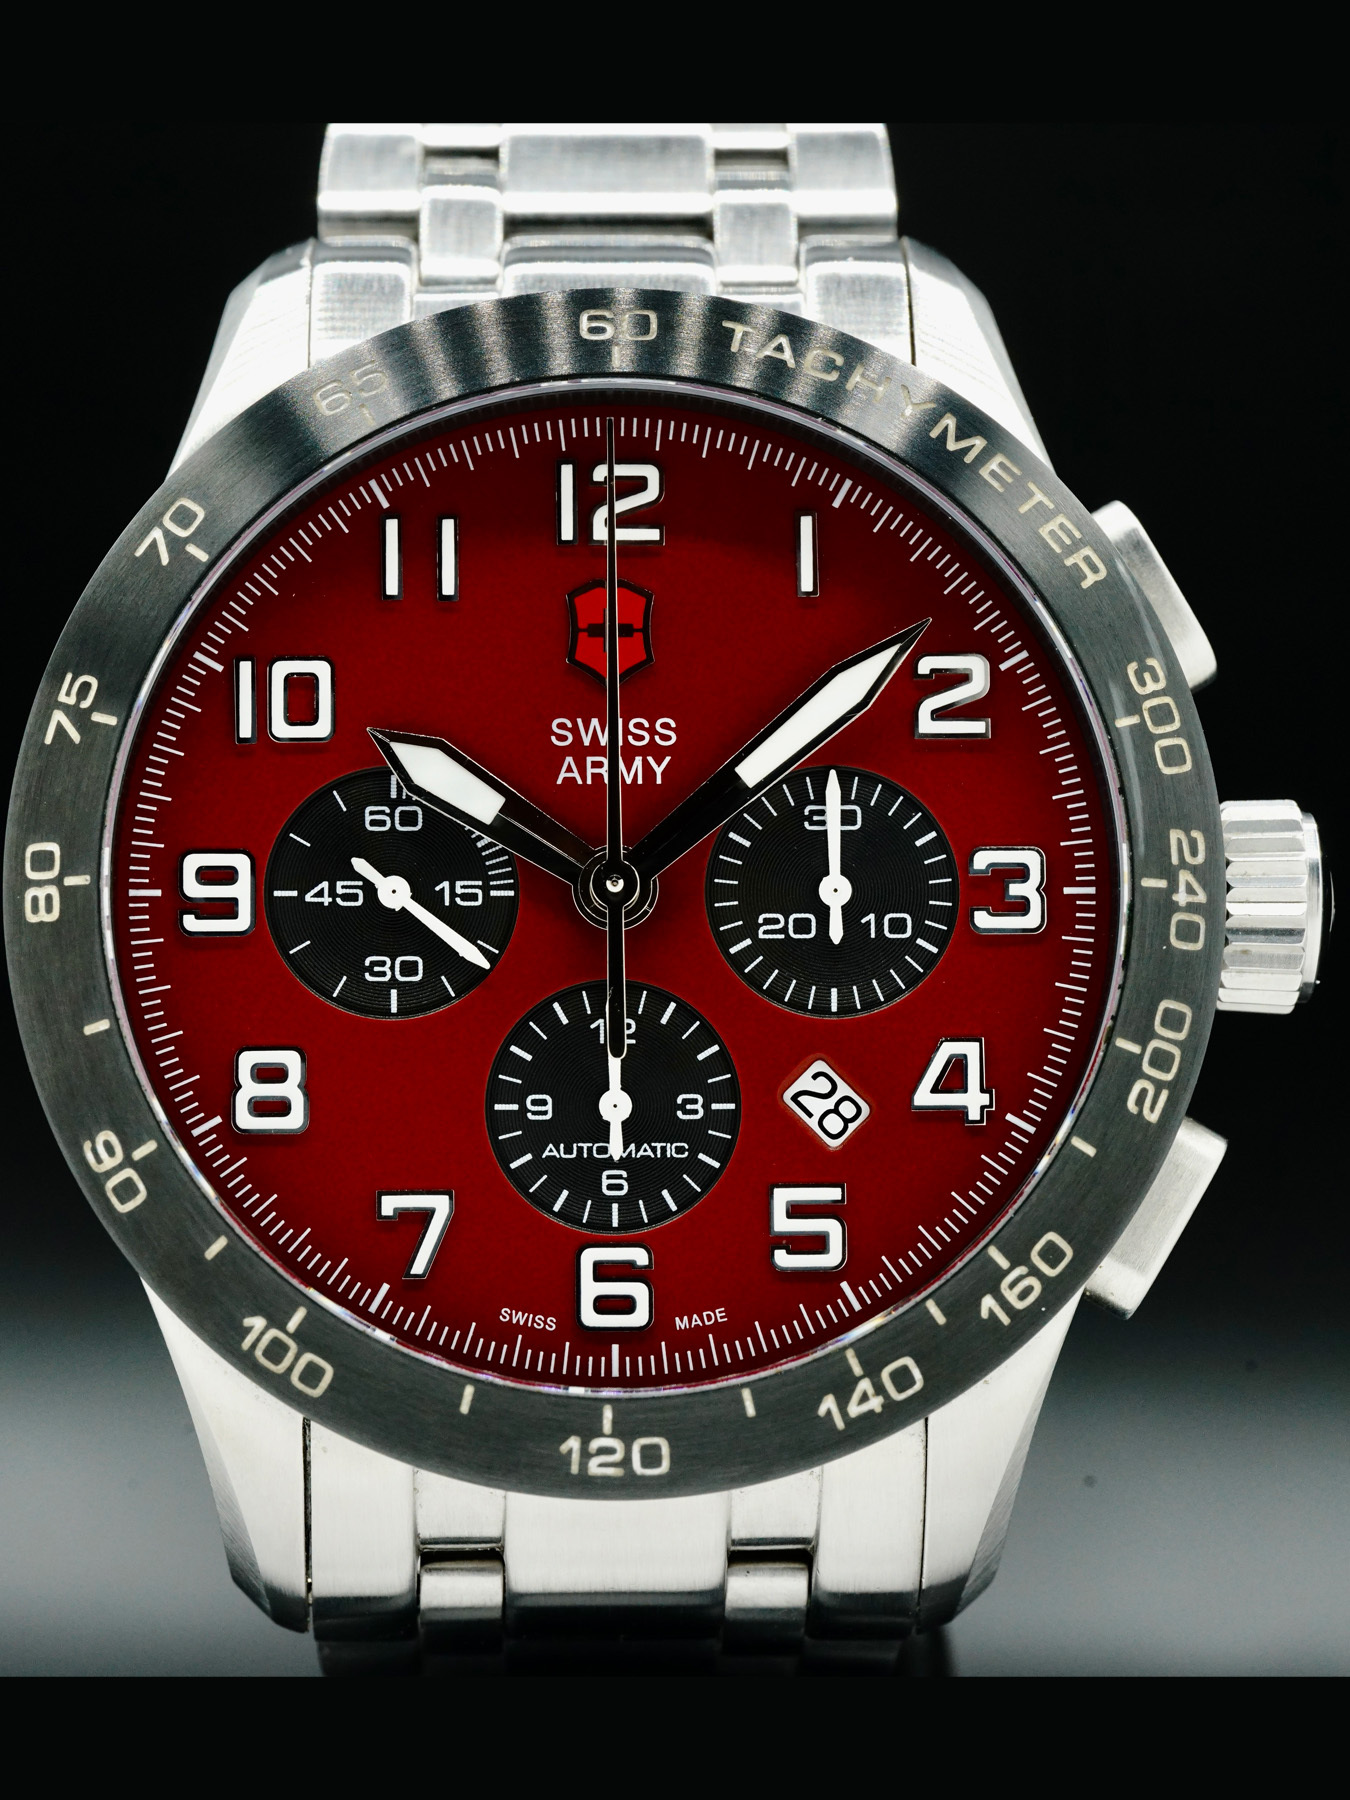 Victorinox Swiss Army Airboss Mach 6 Mechanical - Exquisite Timepieces